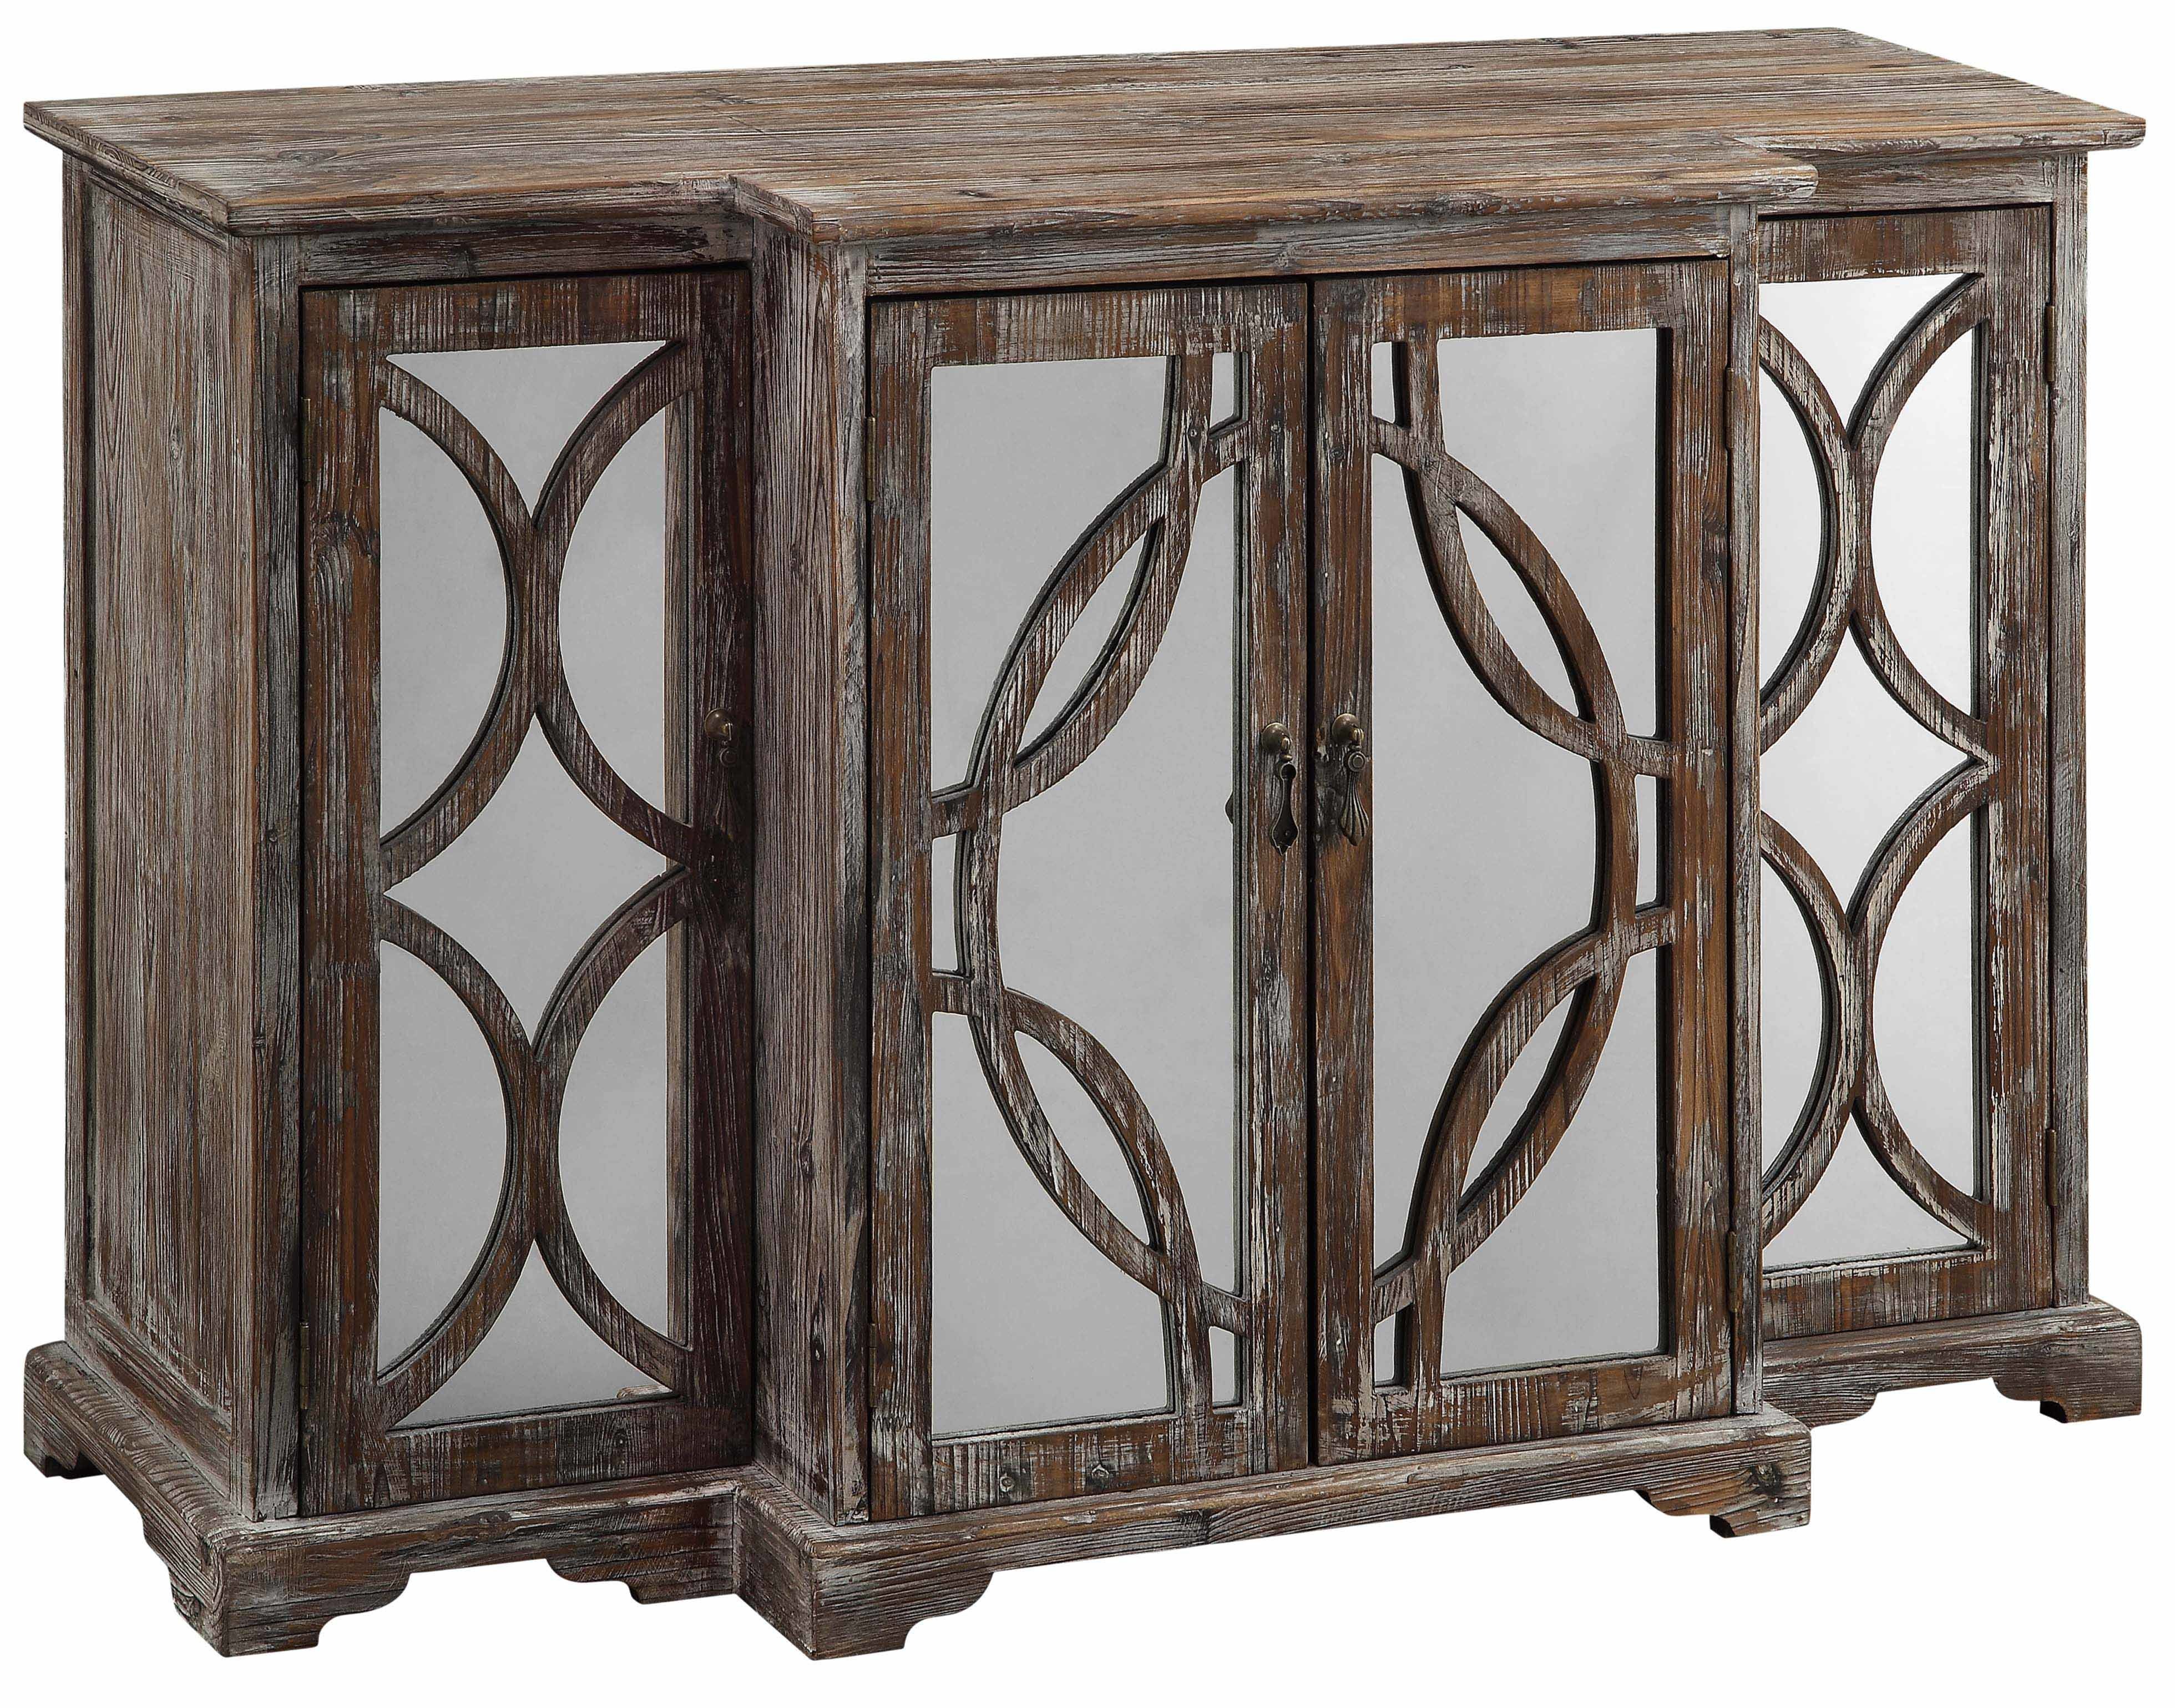 Limeuil Sideboard For Most Recently Released Serafino Media Credenzas (View 8 of 20)